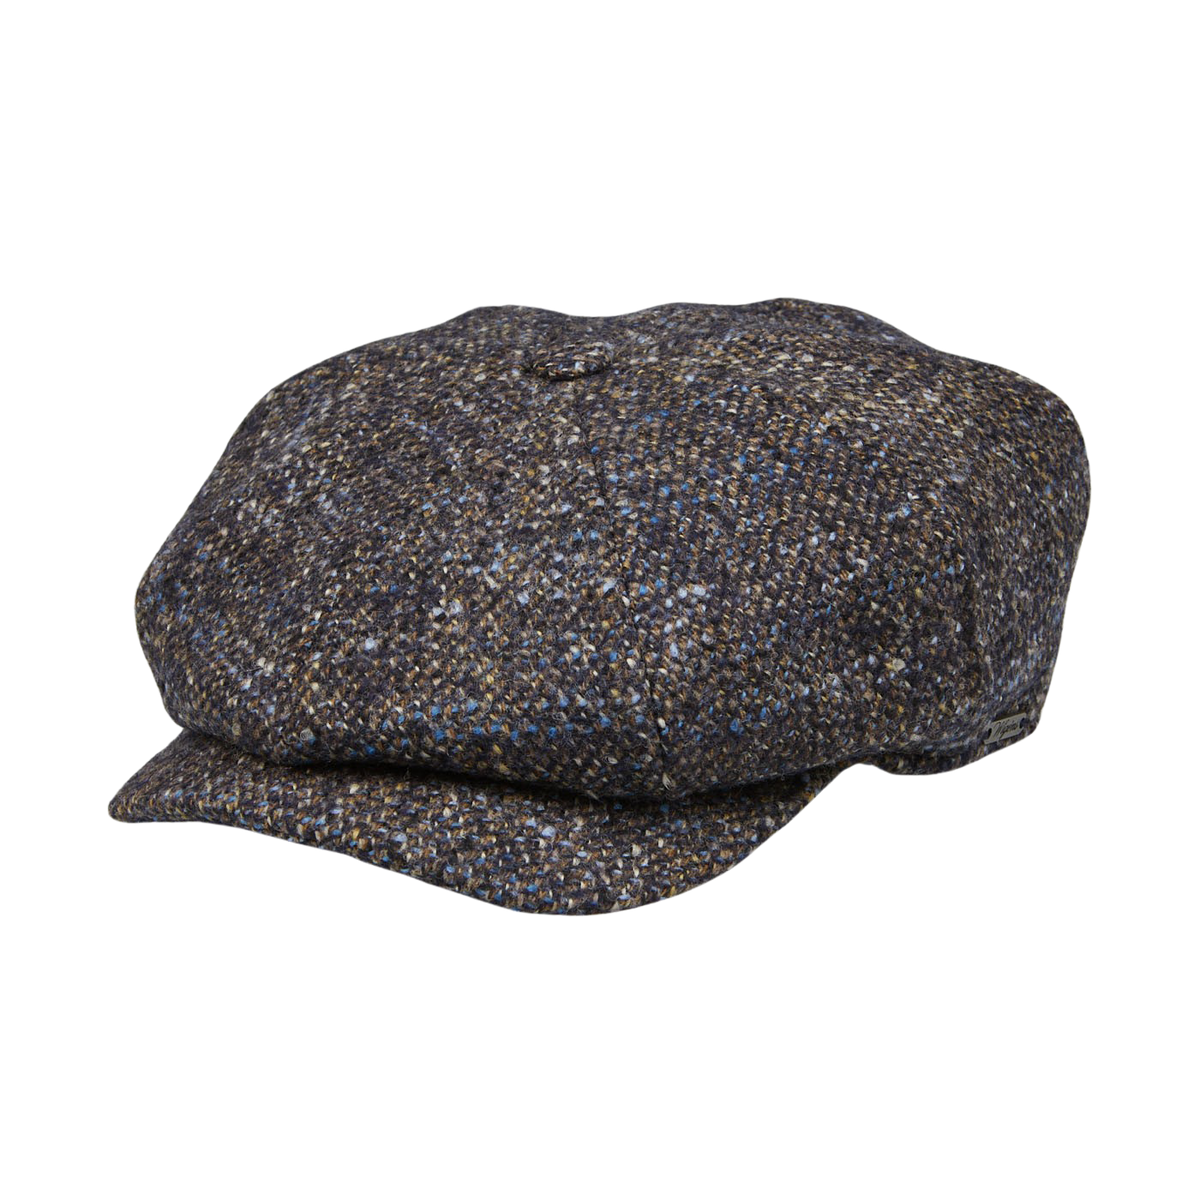 The Blue Melange Wool Ivy Contemporary Cap by Wigéns is shown on a white background.